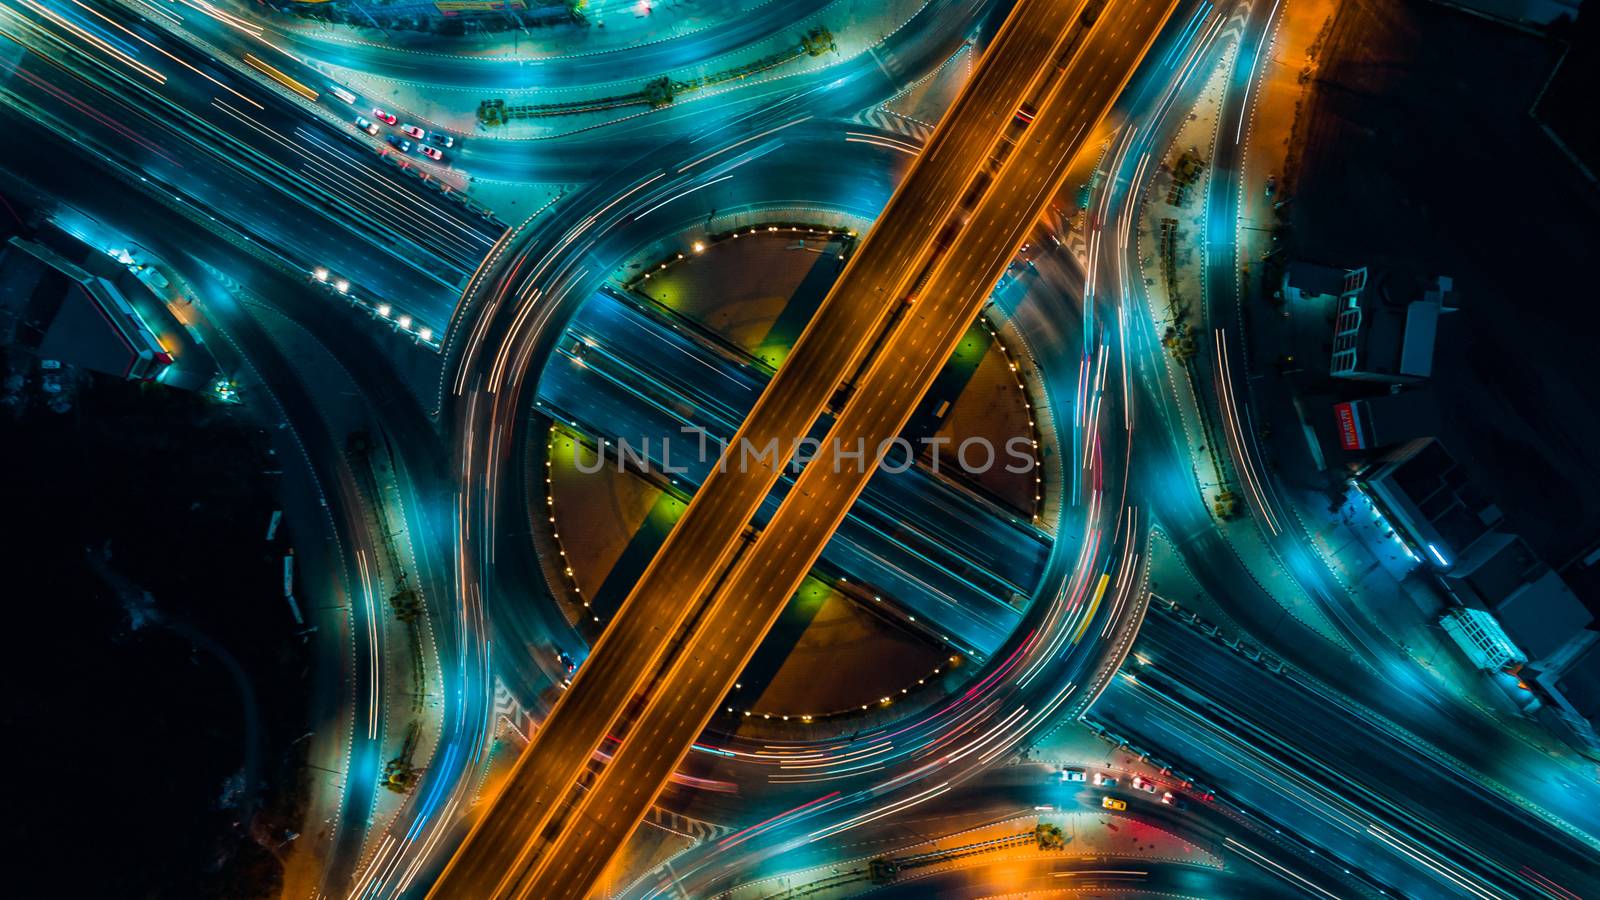 Expressway top view, Road traffic an important infrastructure by PlottyPhoto